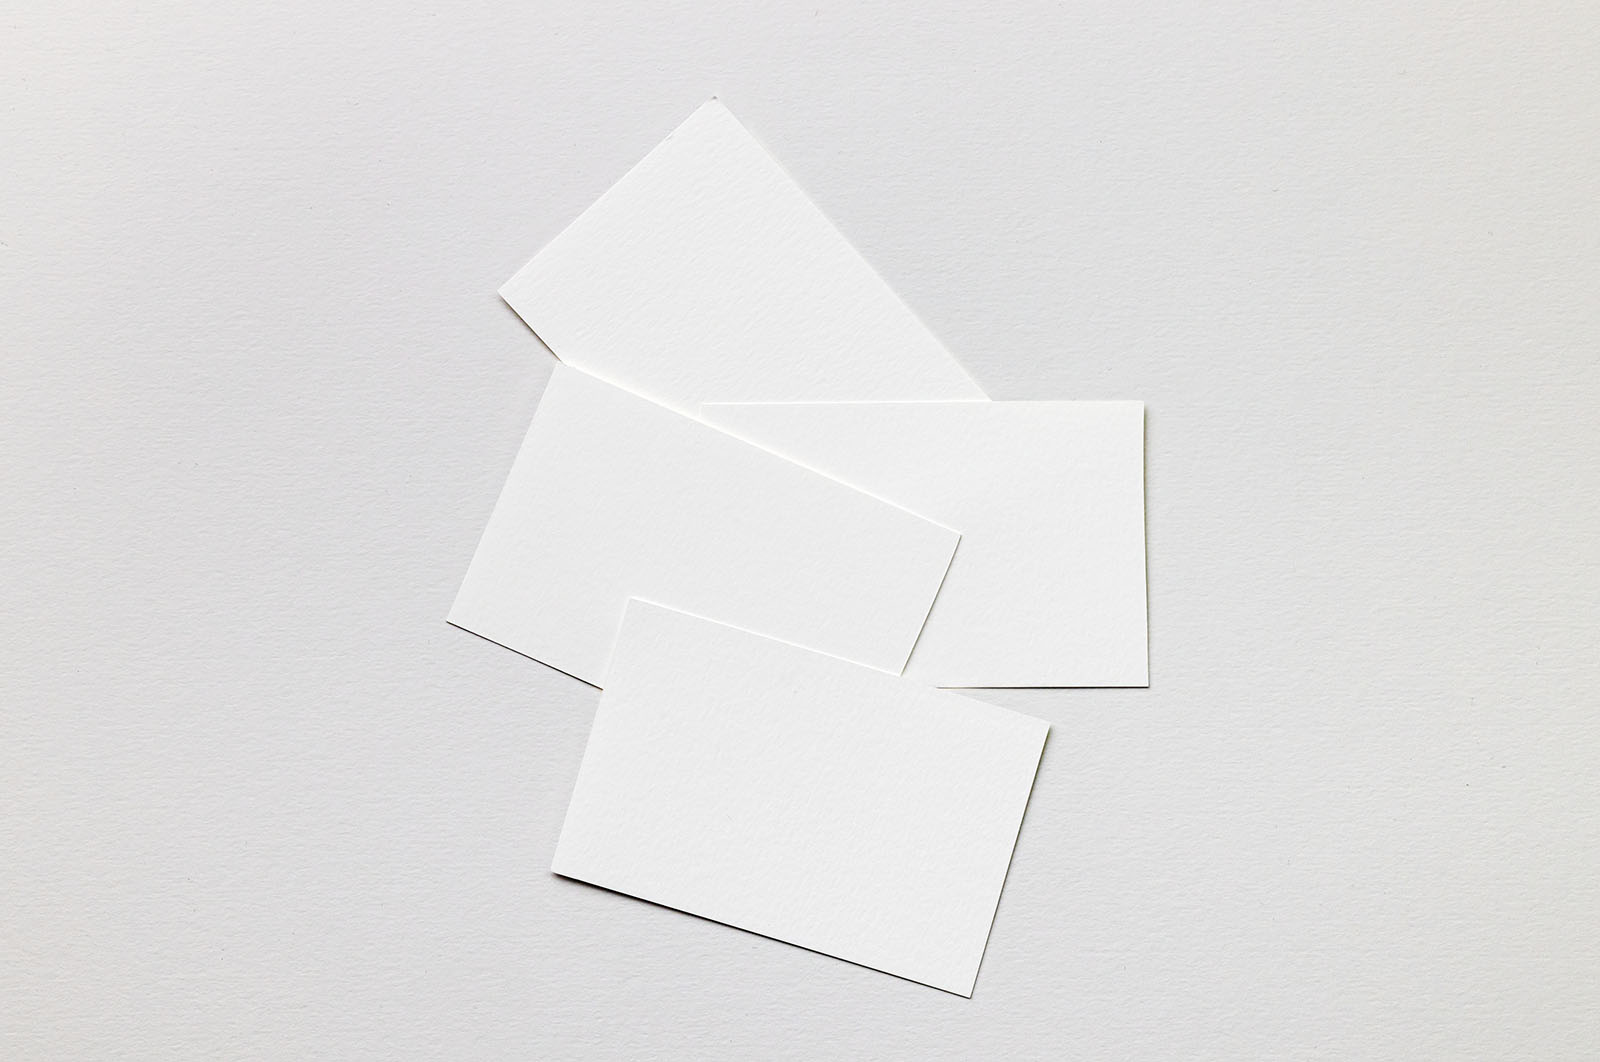 Few business cards lying on paper mockup